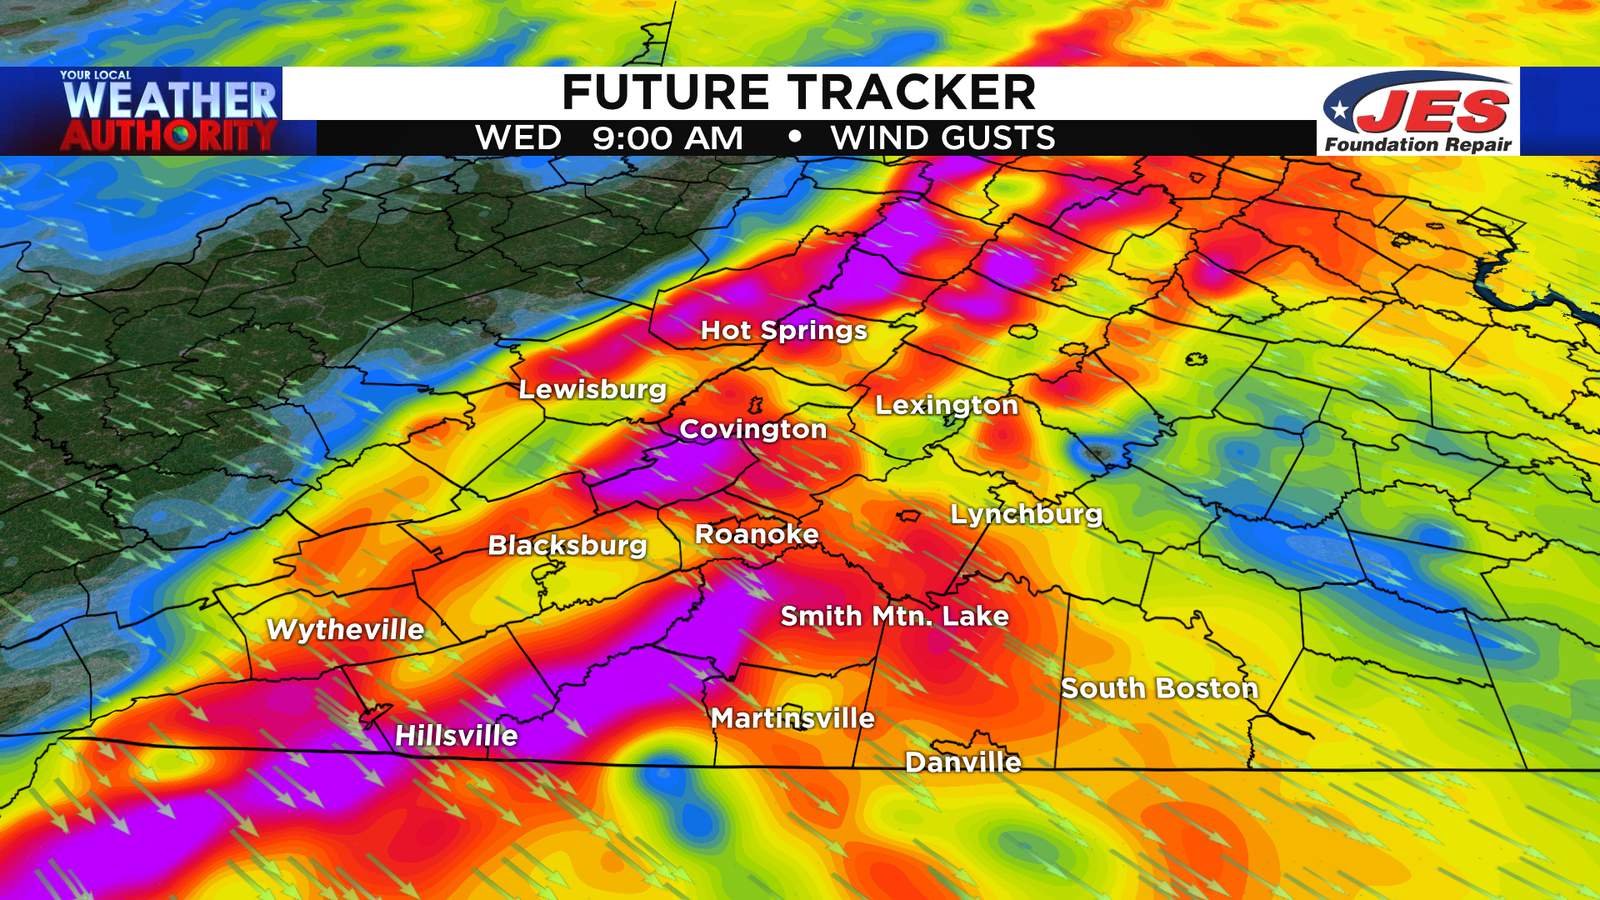 Whew! Wind lingers into Wednesday before a pair of cold fronts approach